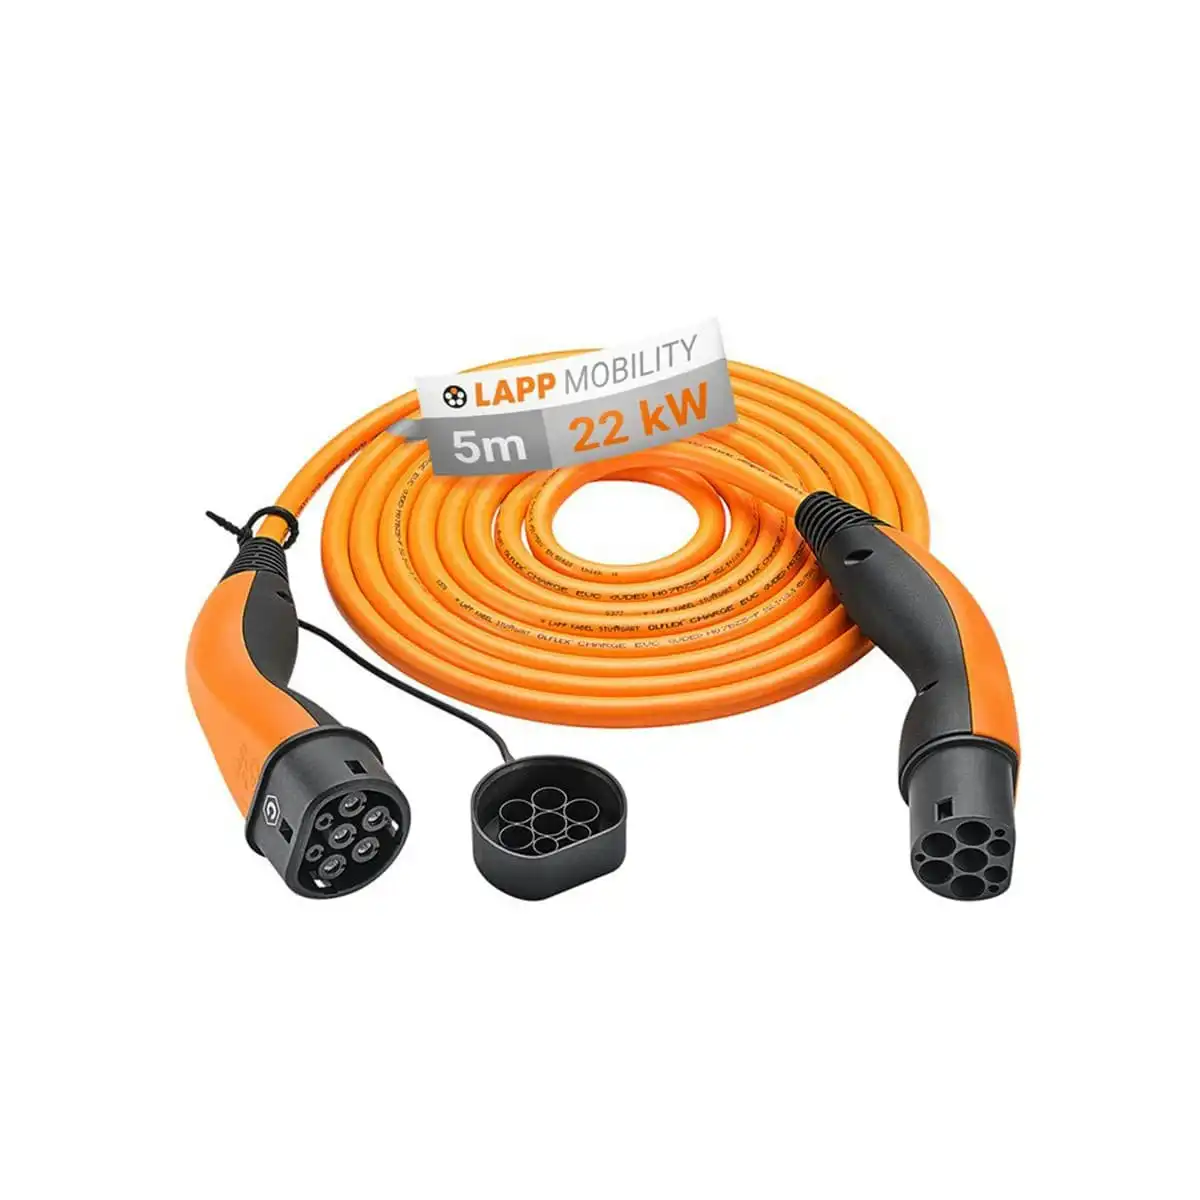 LAPP EV Helix Charge Cable Type 2 (22kW-3P-32A) 5m for Hybrid and Electric Cars - Orange